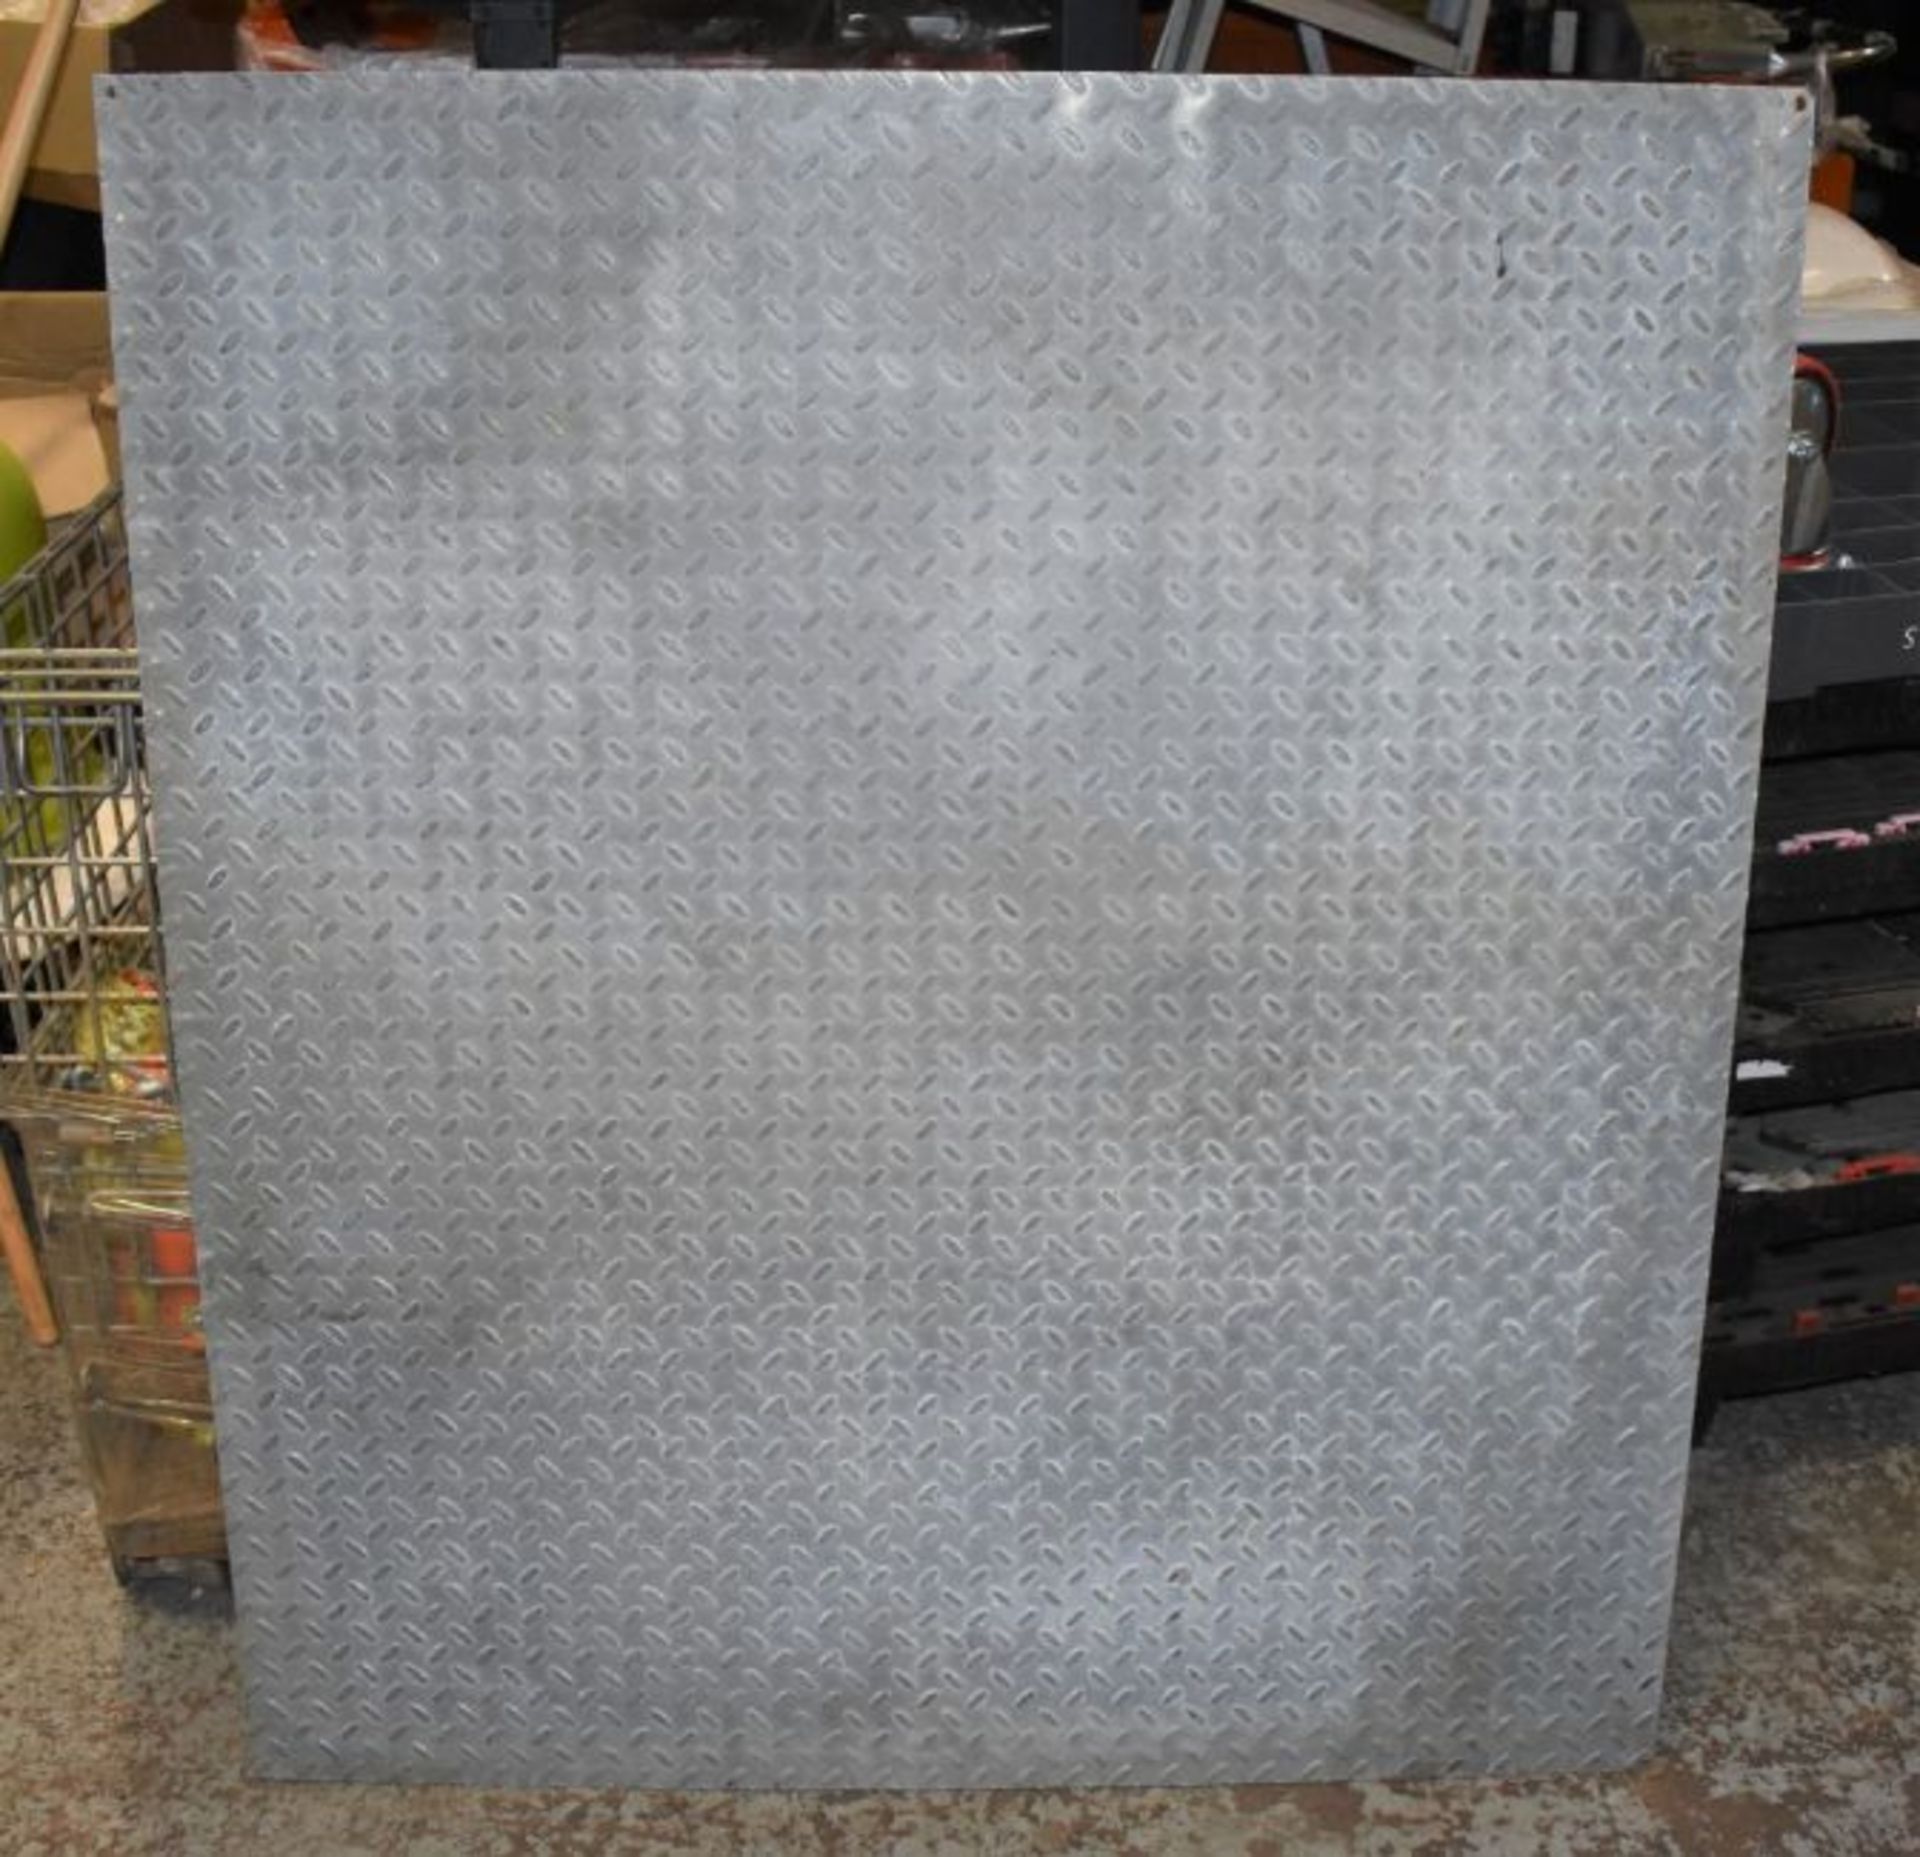 1 x Steel Tread Checker Plate - Size 106.5 x 122 x 0.6 cms - None Slip Floor Plate Suitable For - Image 2 of 6